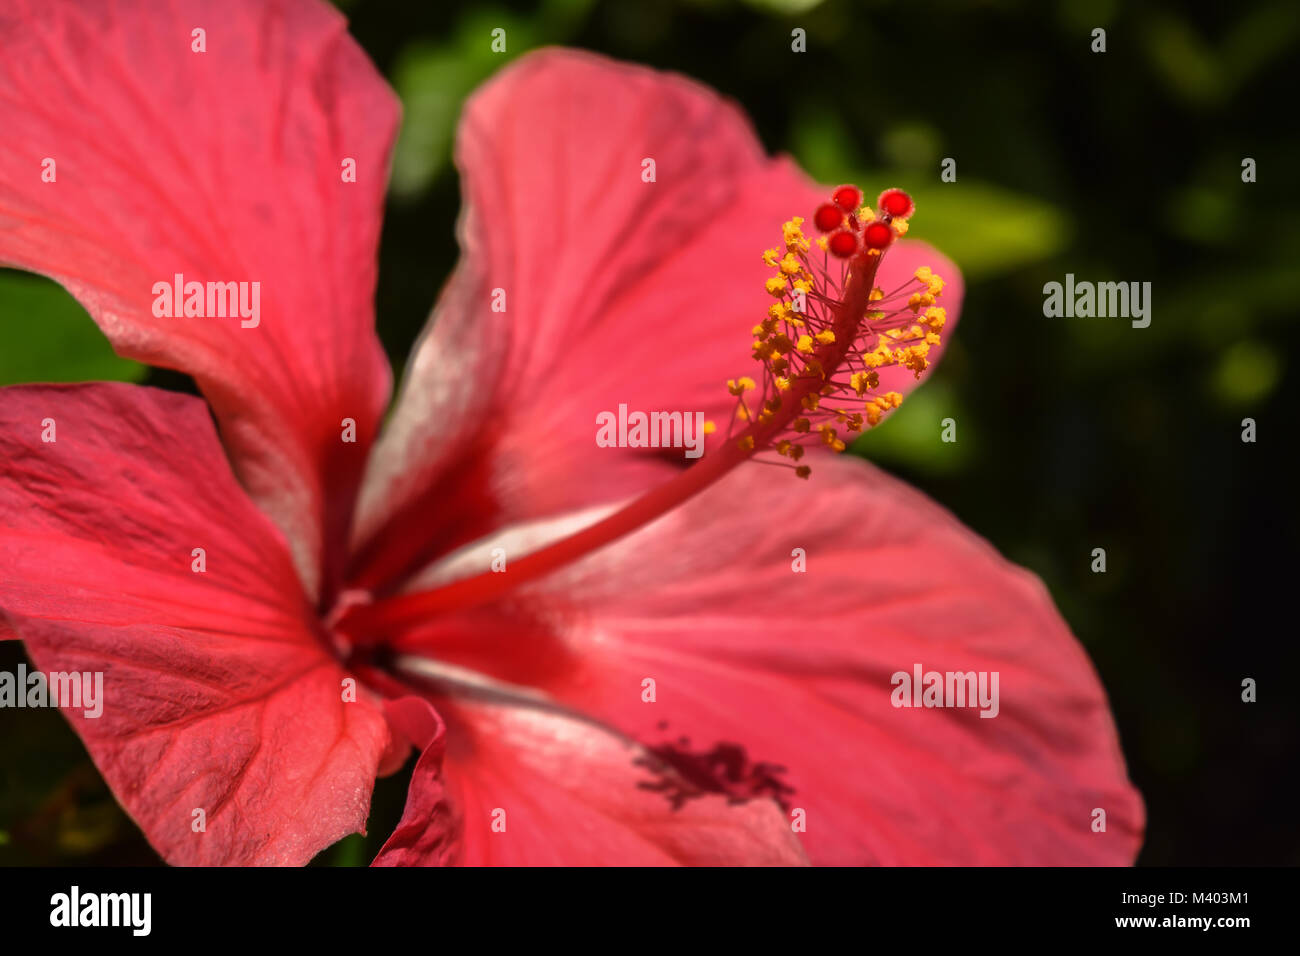 Close up of pink hibiscus flower showing stamen and stigma Stock Photo